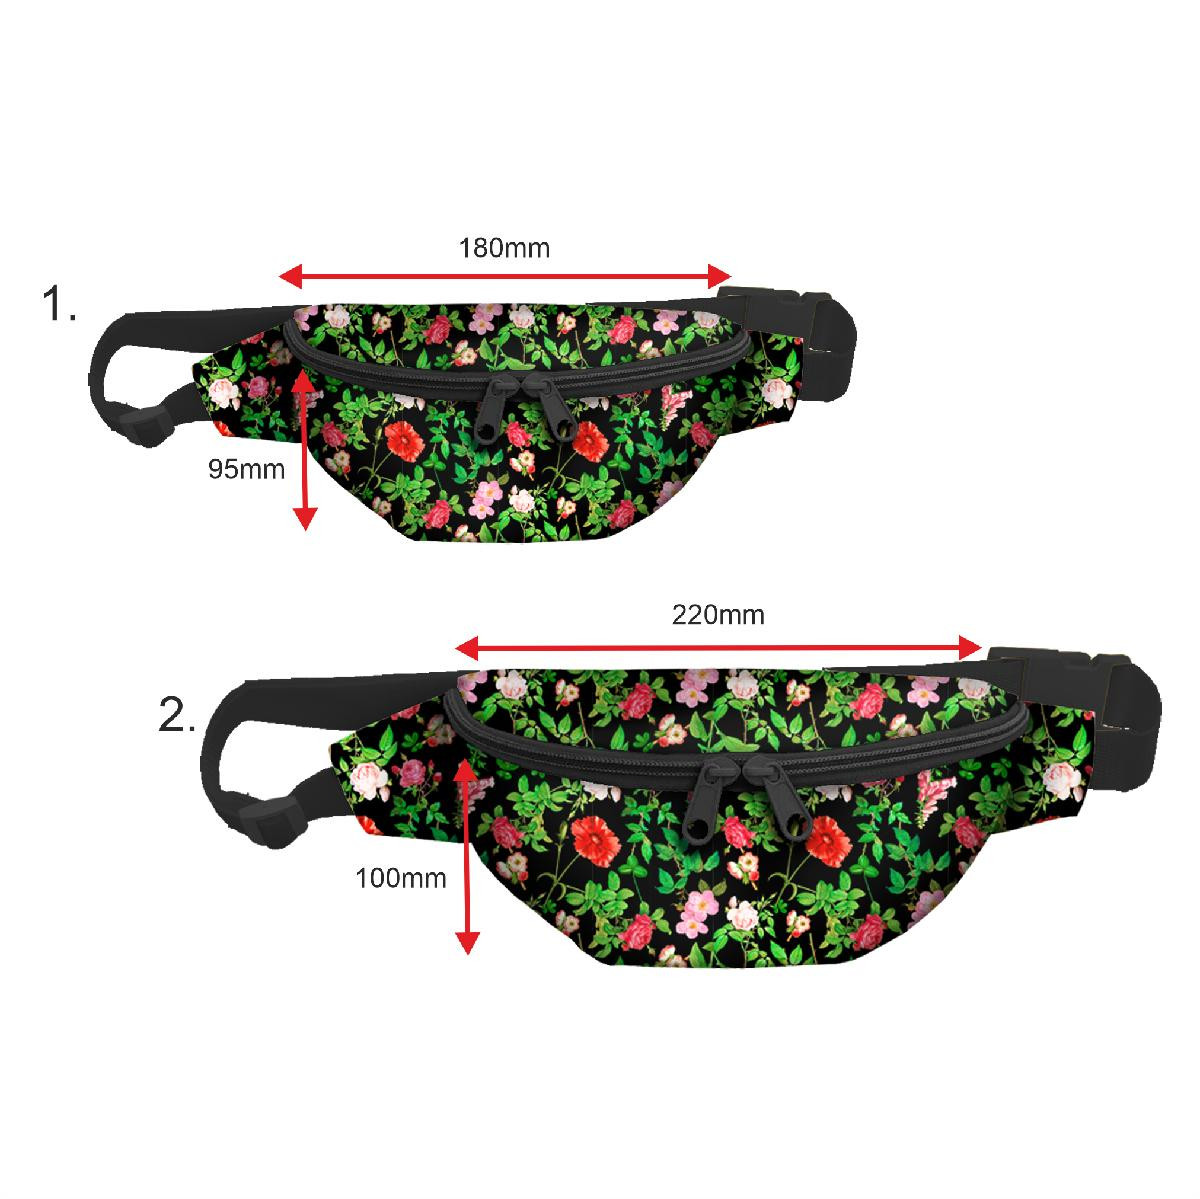 HIP BAG - MINI ROSES AND LEAVES (PARADISE GARDEN) / Choice of sizes